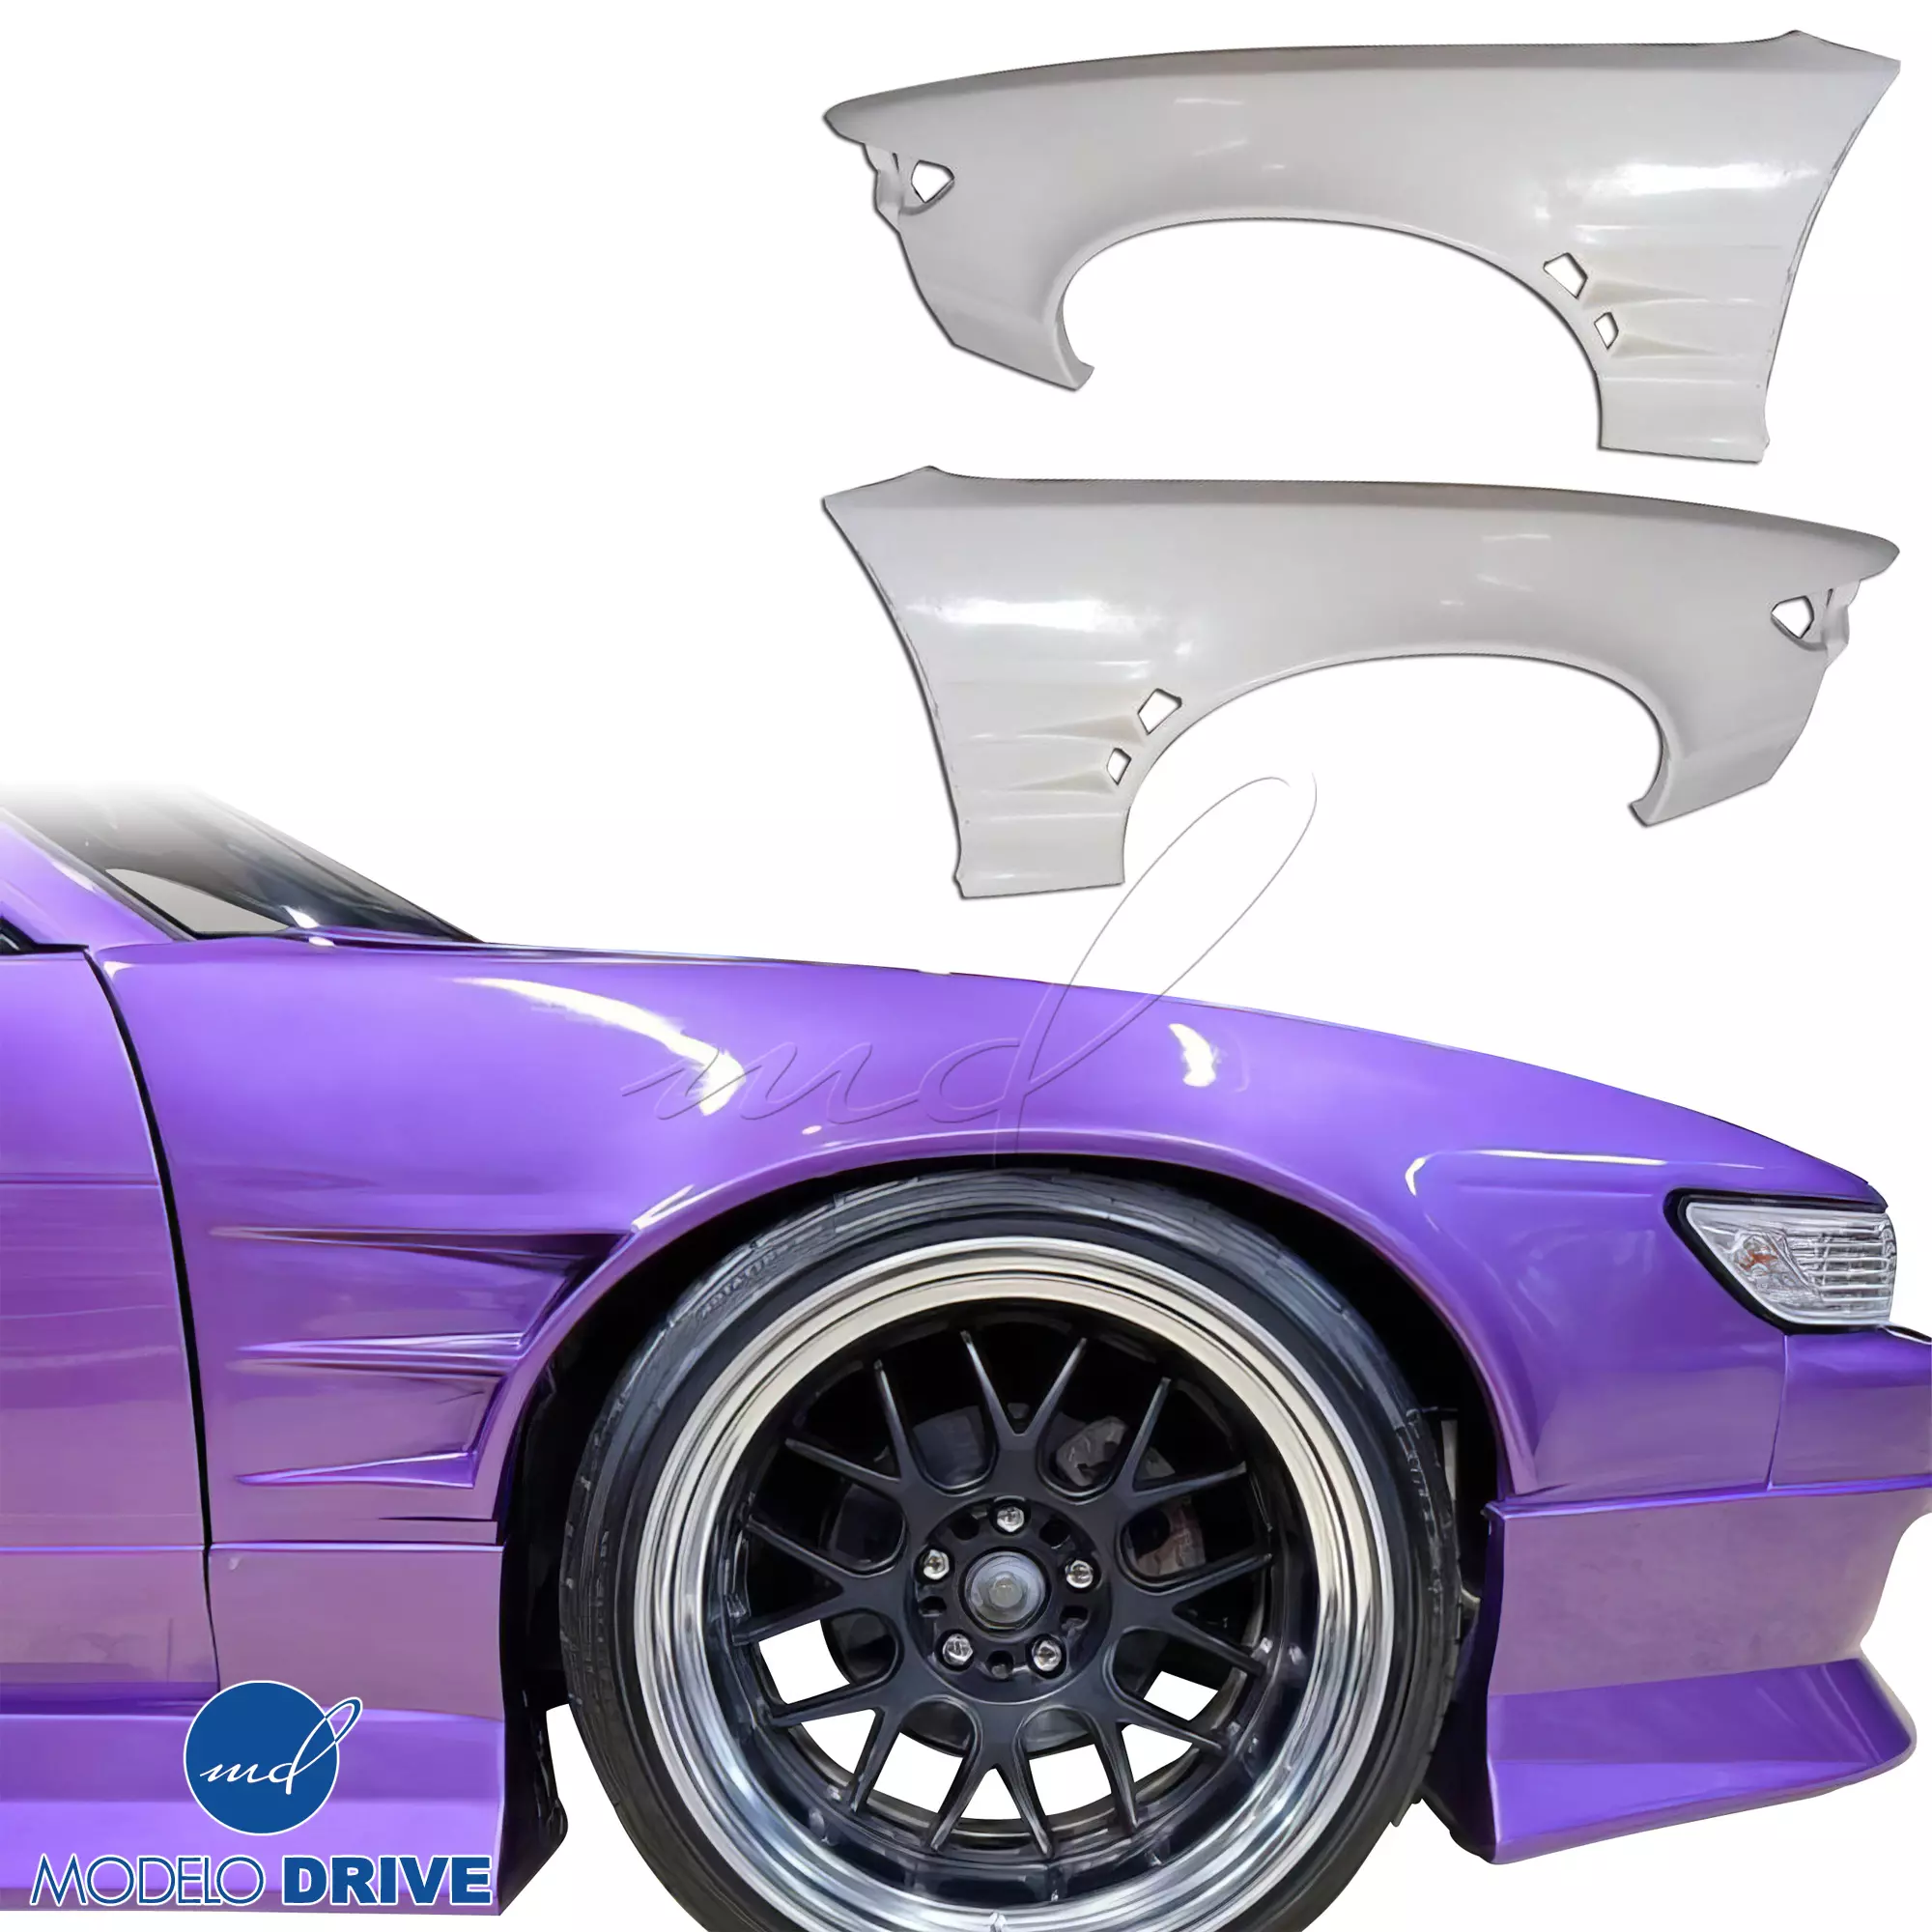 ModeloDrive FRP ORI t3 55mm Wide Body Fenders (front) > Nissan Silvia S13 1989-1994> 2/3dr - Image 5